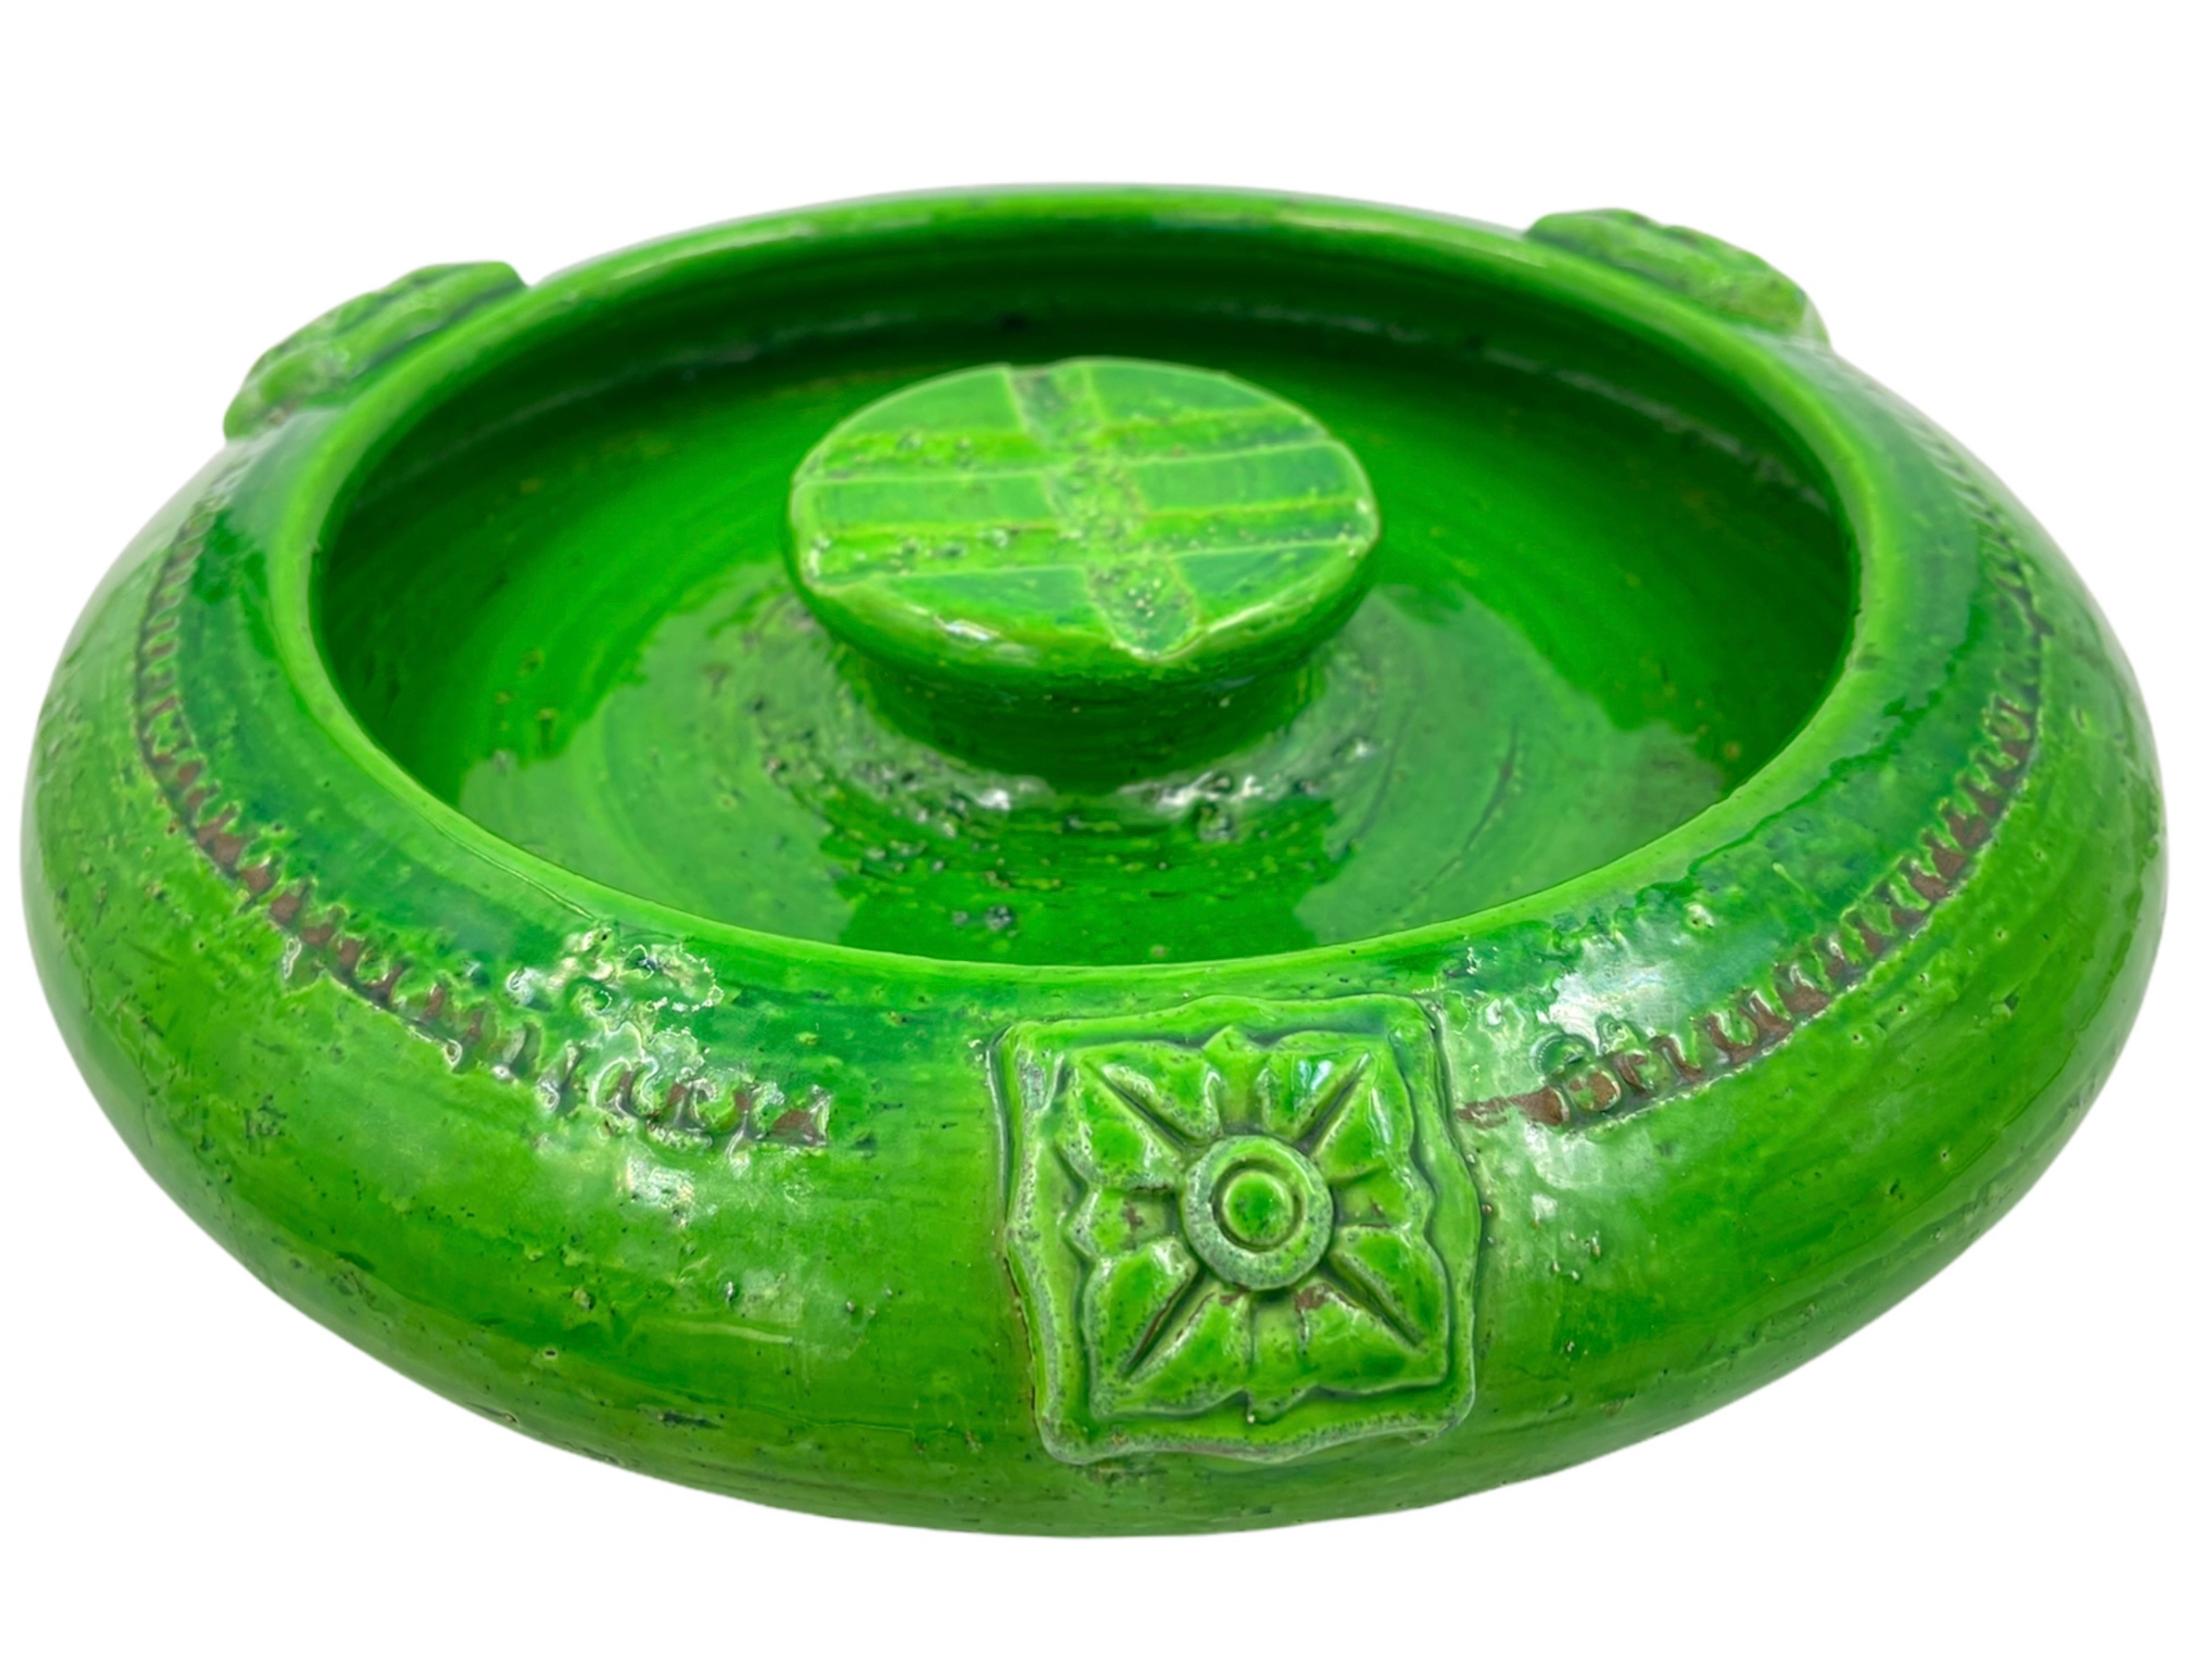 Green ashtray by Aldo Londi for Bitossi. Handcrafted in Italy with hand-carved geometric designs. Round ash receiver with nice midcentury designed in a great glazed vibrant lime green. circa 1960s. Marked Italy. Signed and numbered.

Measures: 2”